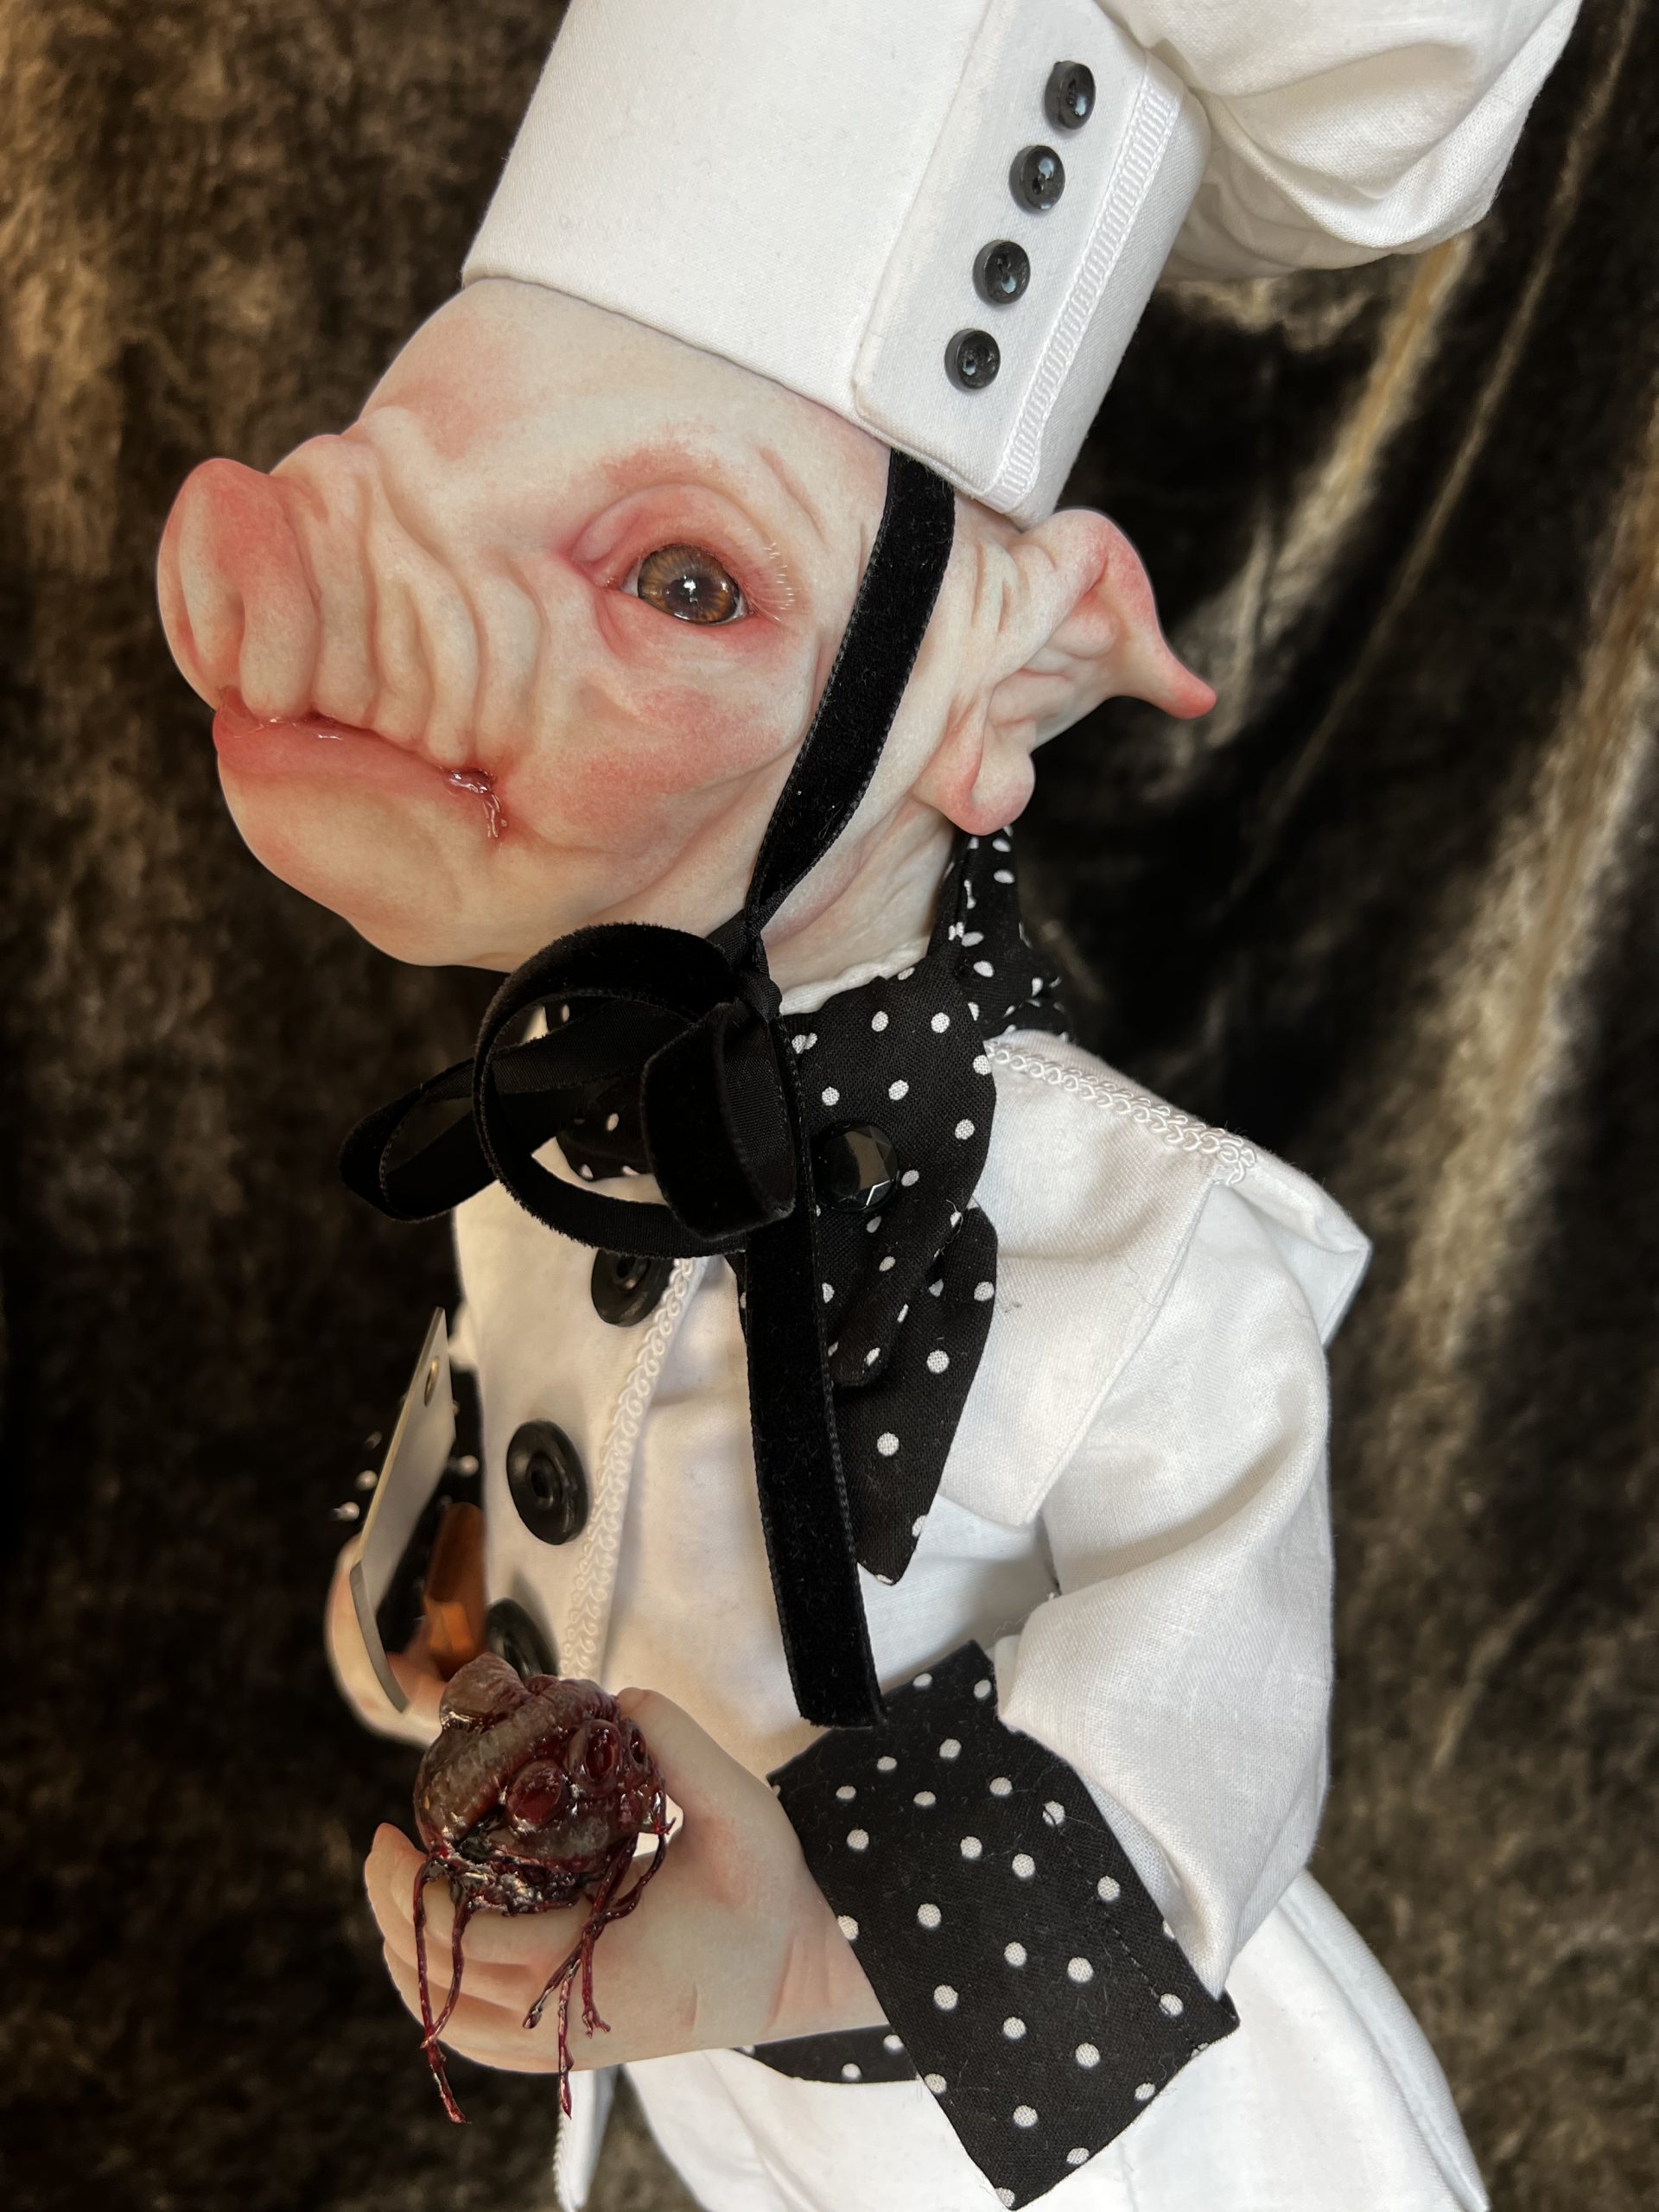 close-up hand painted vinyl pig doll wearing chef uniform holding bloody heart